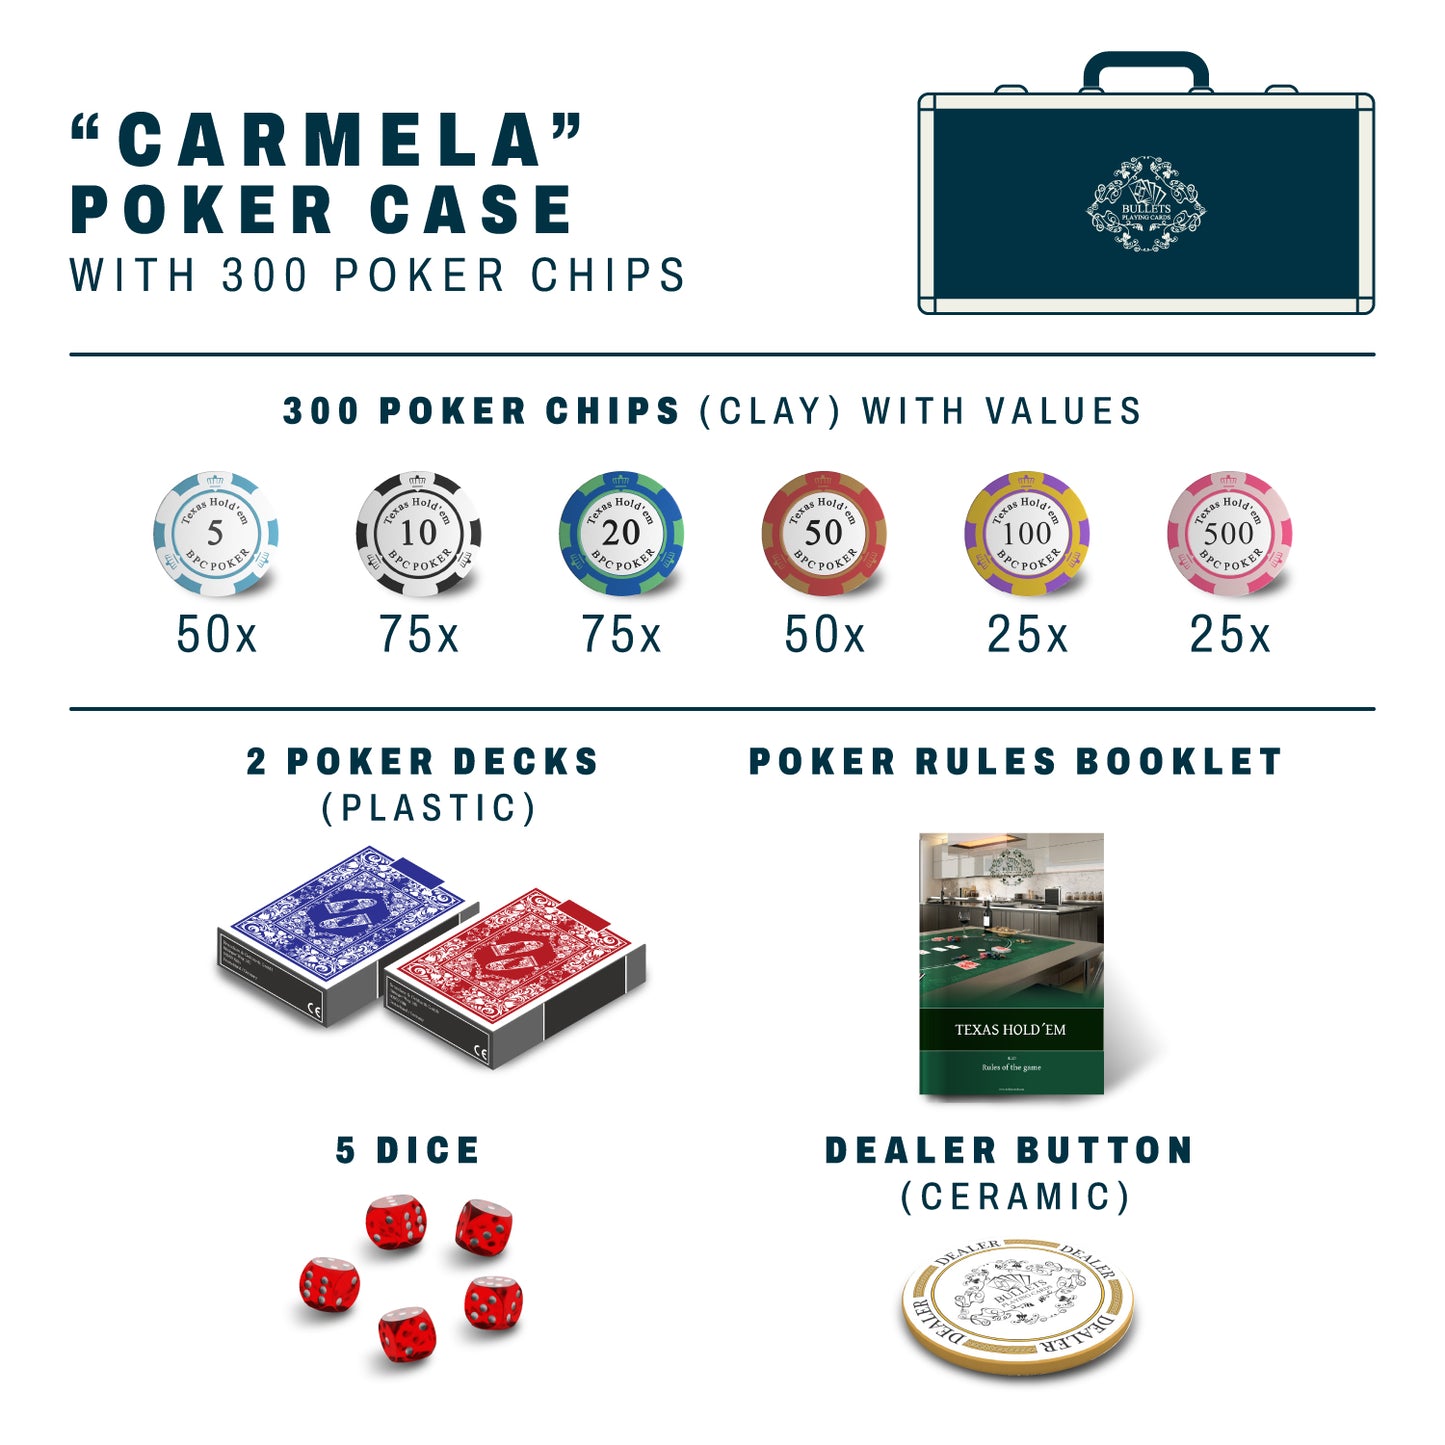 Poker case with 300 clay poker chips "Carmela" with values